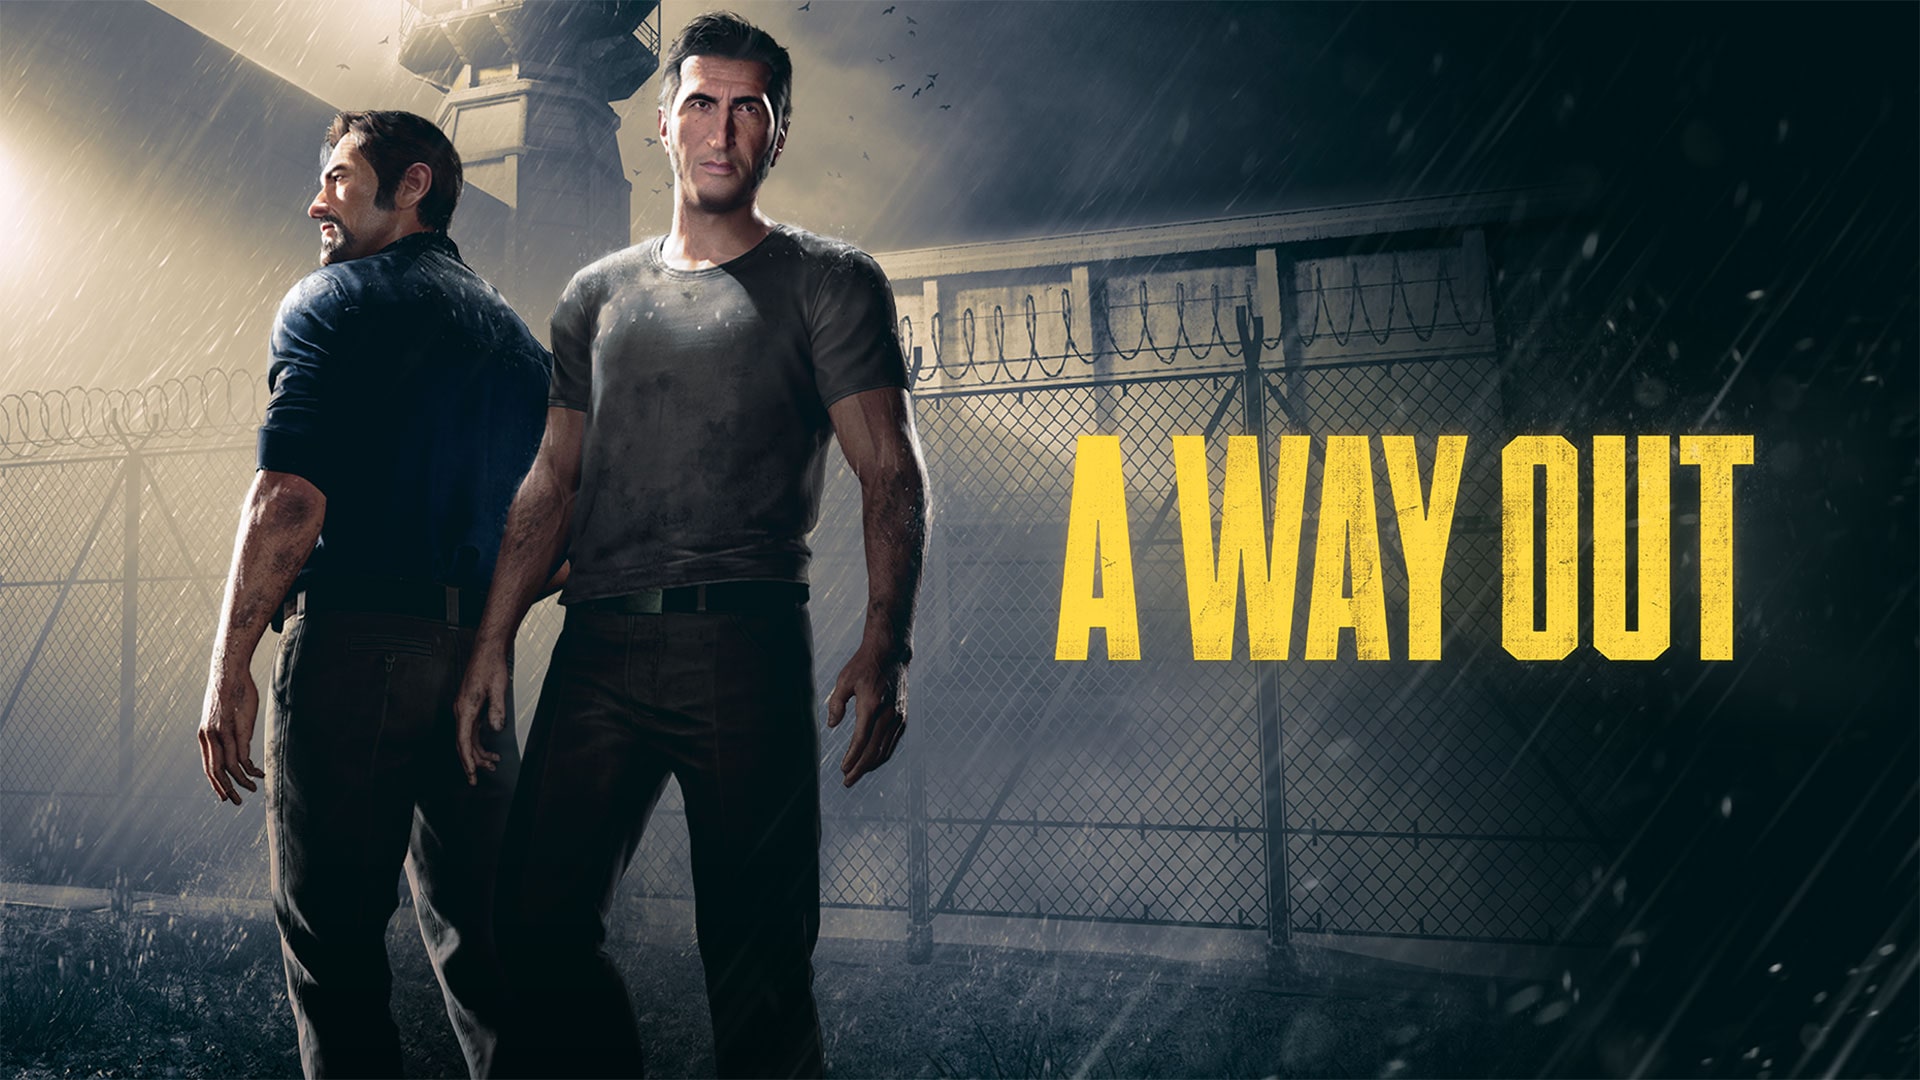 A way out джойстик. A way out ps4. A way out Xbox. A way out Лео. A way out Xbox 360.